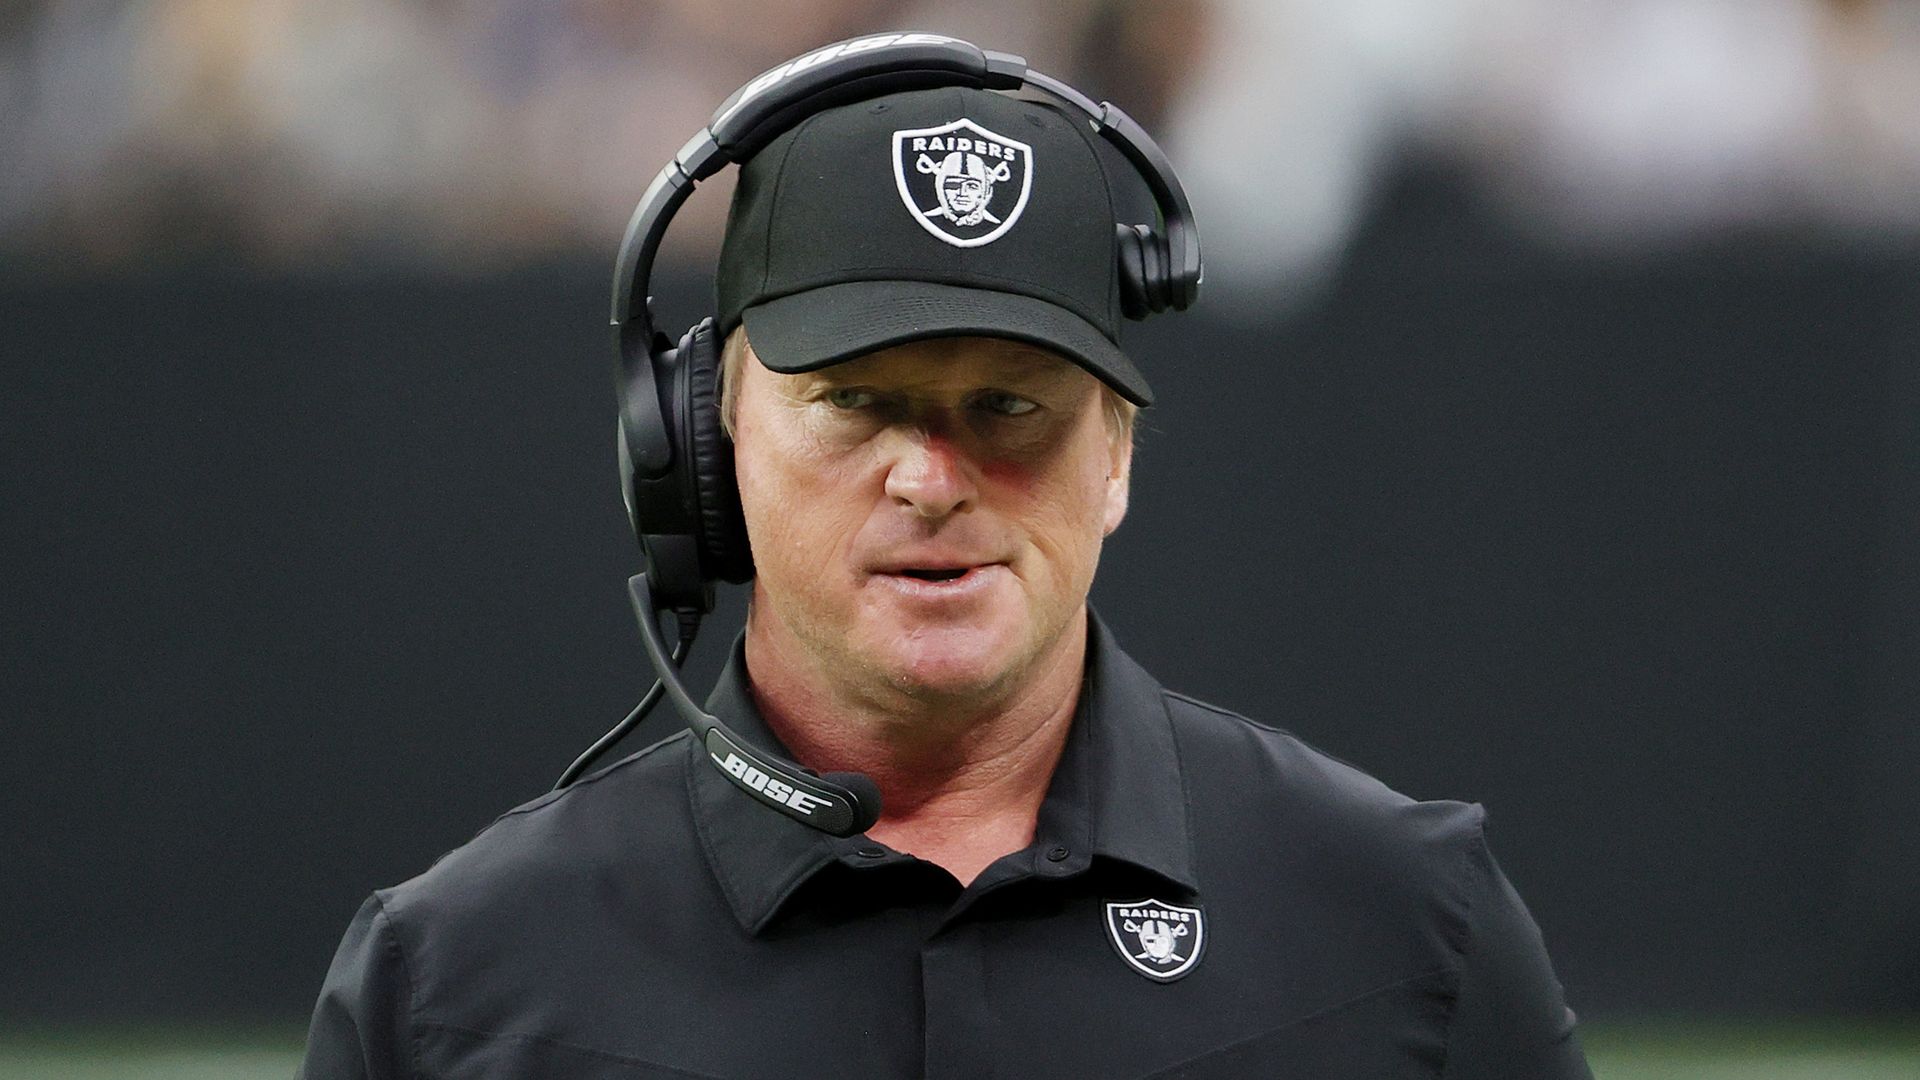 Former Las Vegas Raiders head coach John Gruden during a game against the Chicago Bears at Allegiant Stadium on October 10, 2021 in Las Vegas, Nevada. 